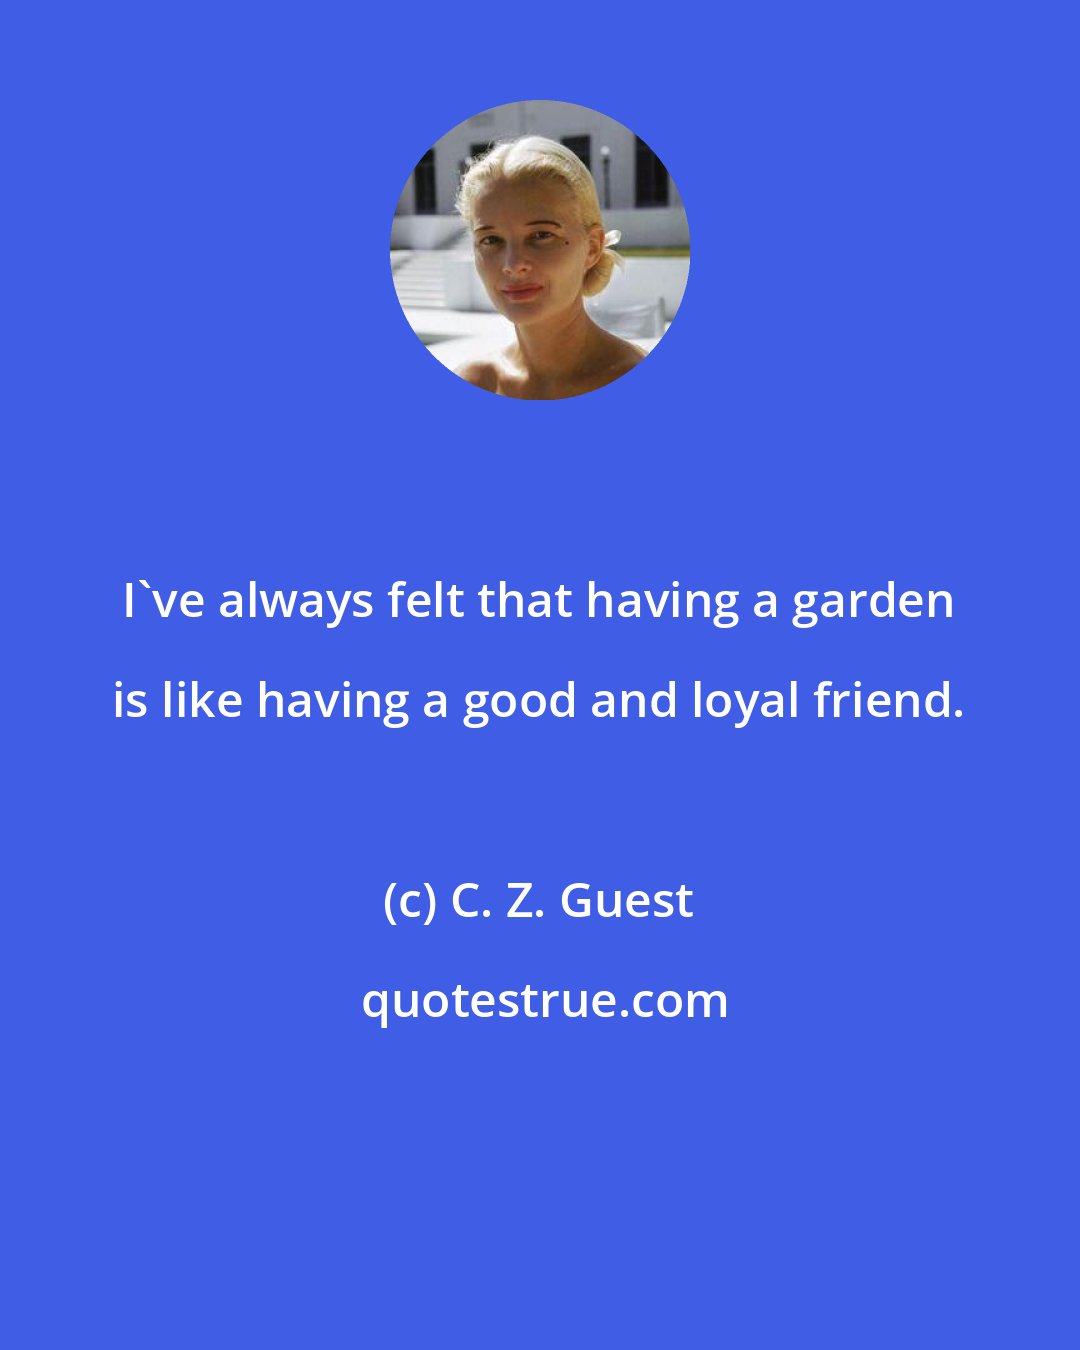 C. Z. Guest: I've always felt that having a garden is like having a good and loyal friend.